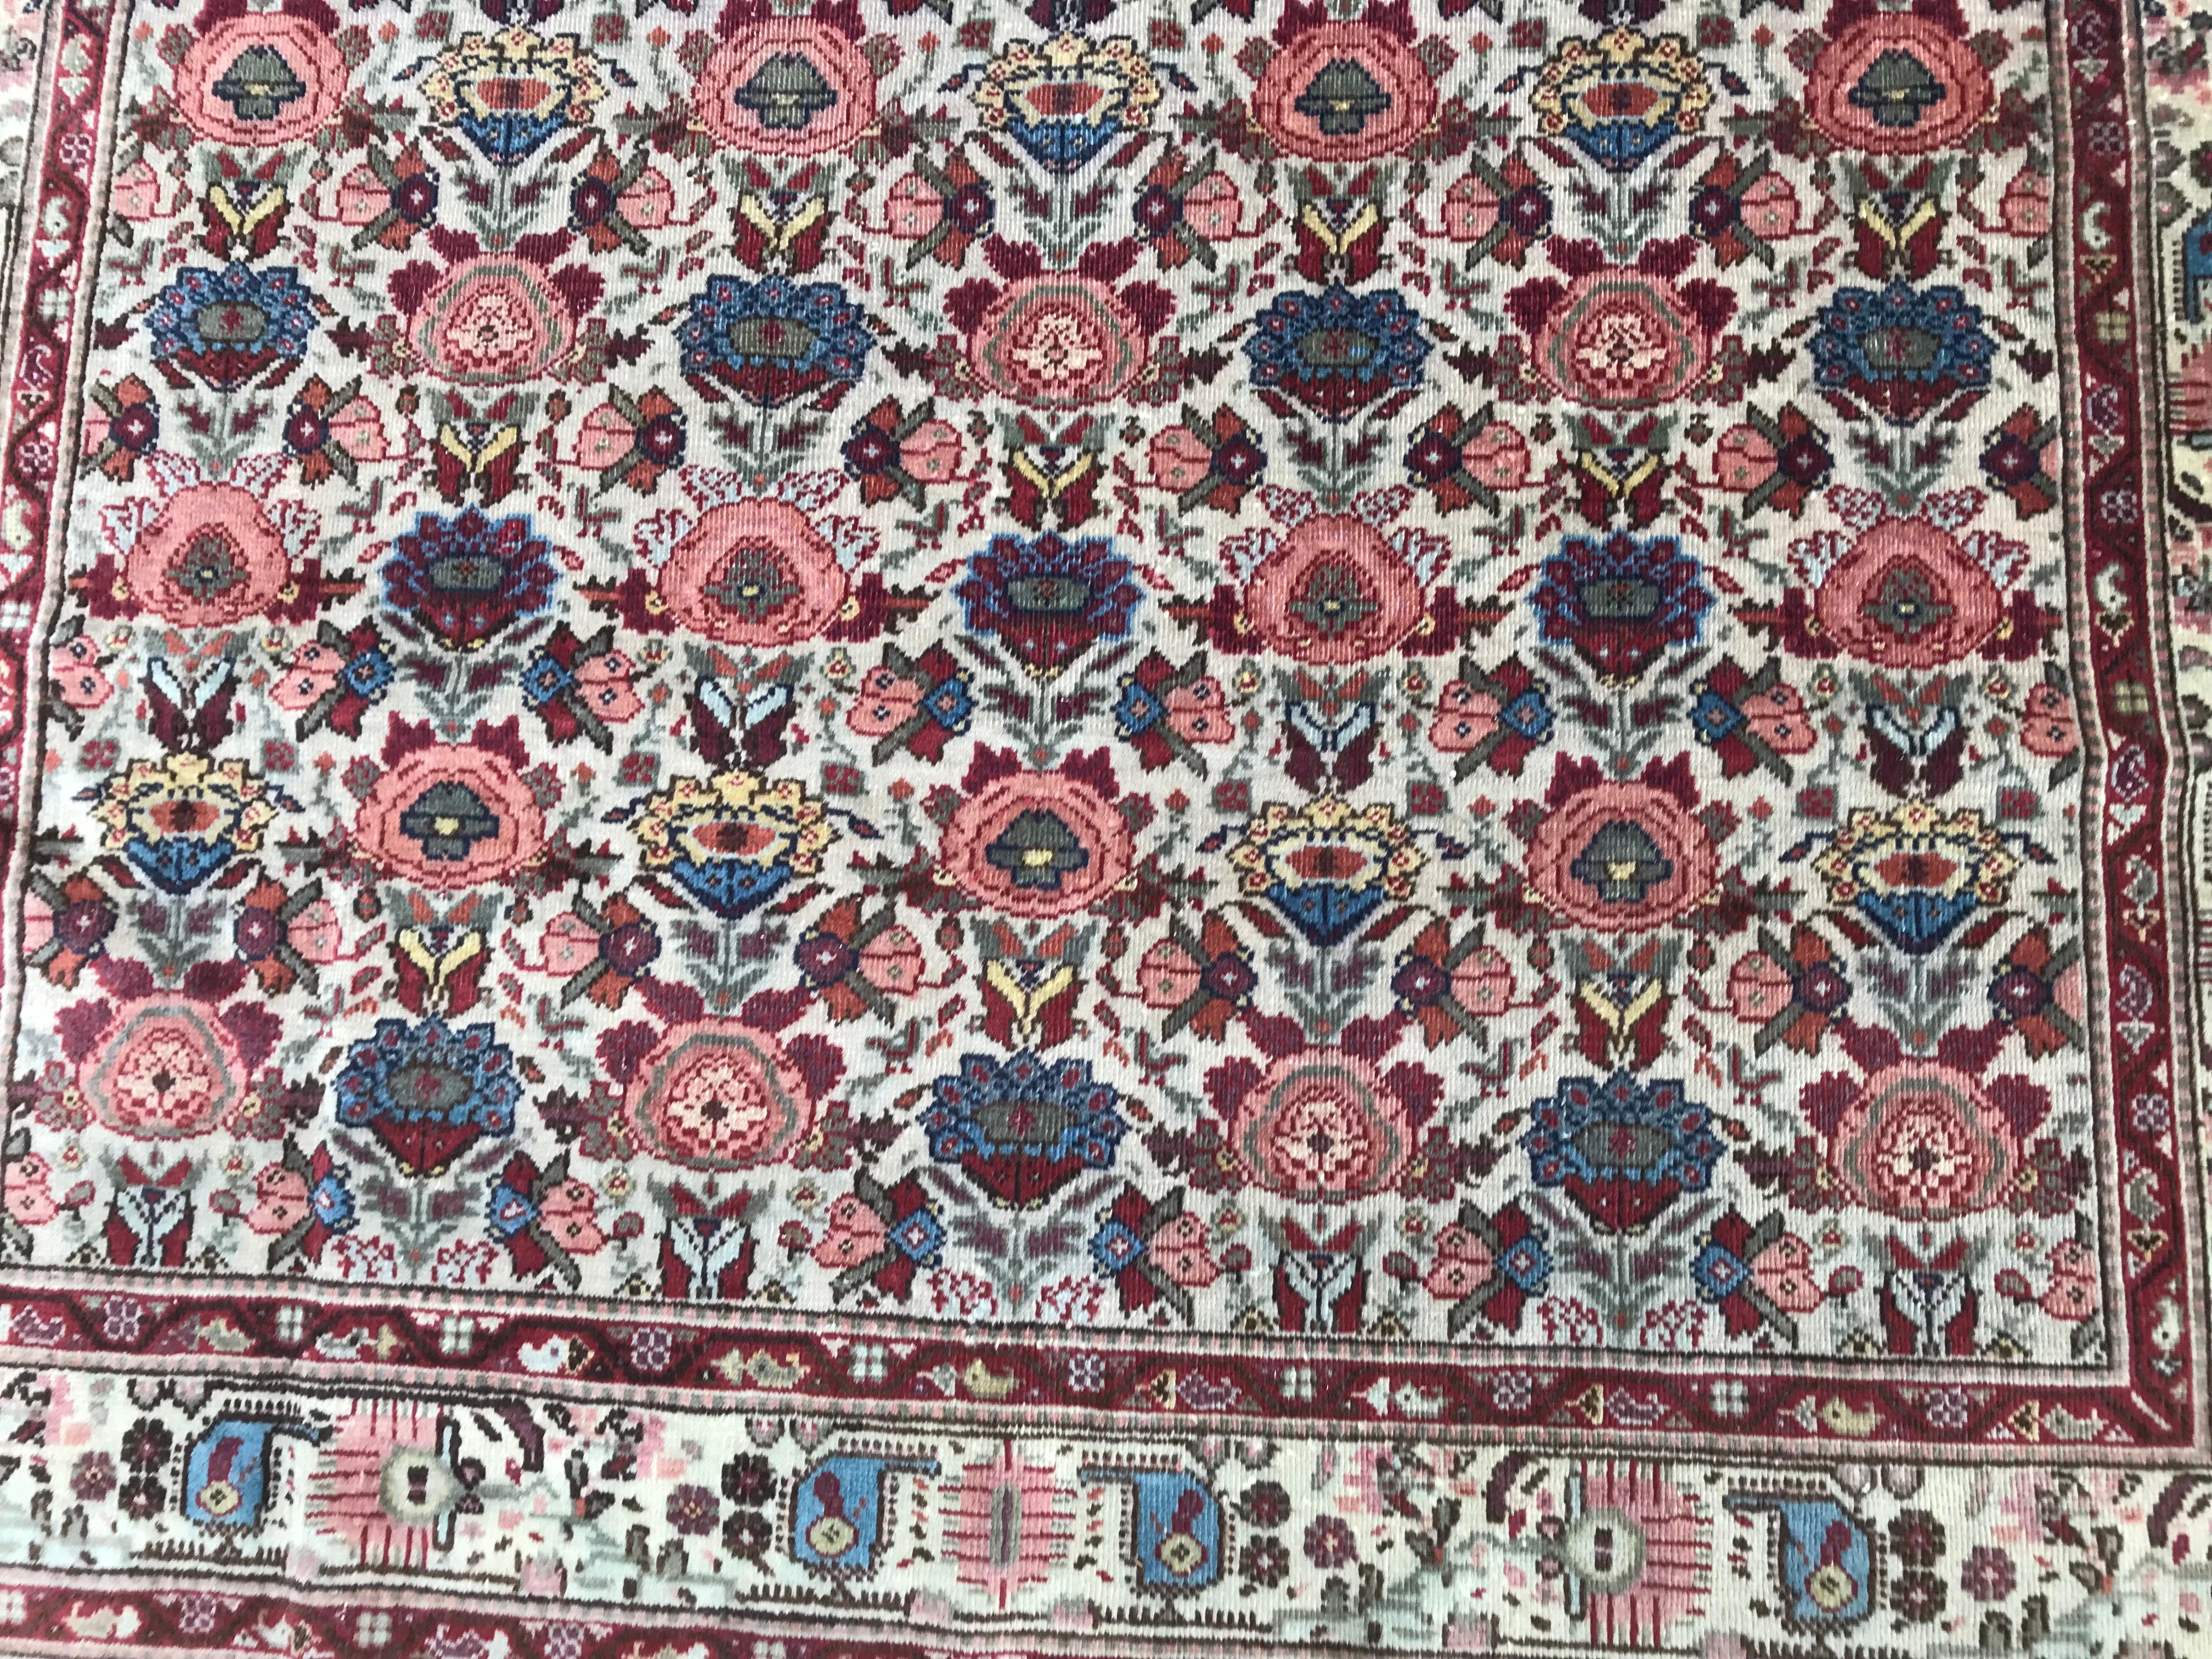 Beautiful fine Turkish rug, probably Sivas rug, mid-20th century, with a decorative floral design and nice colors, finely hand knotted with wool velvet on cotton foundation.